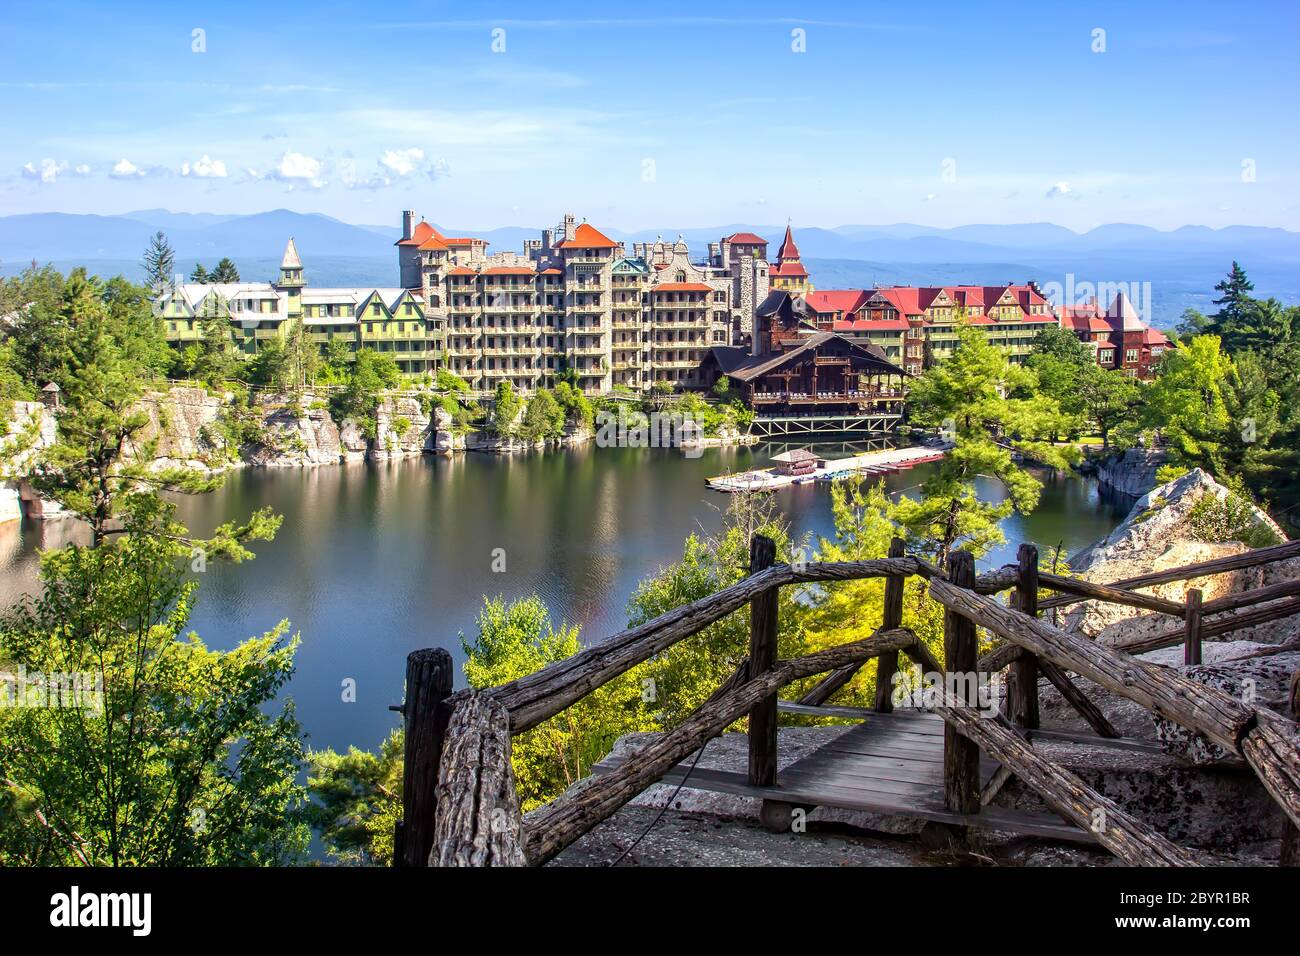 Scenic view of Mohonk Mountain House and Mohonk Lake in upstate New York. Stock Photo